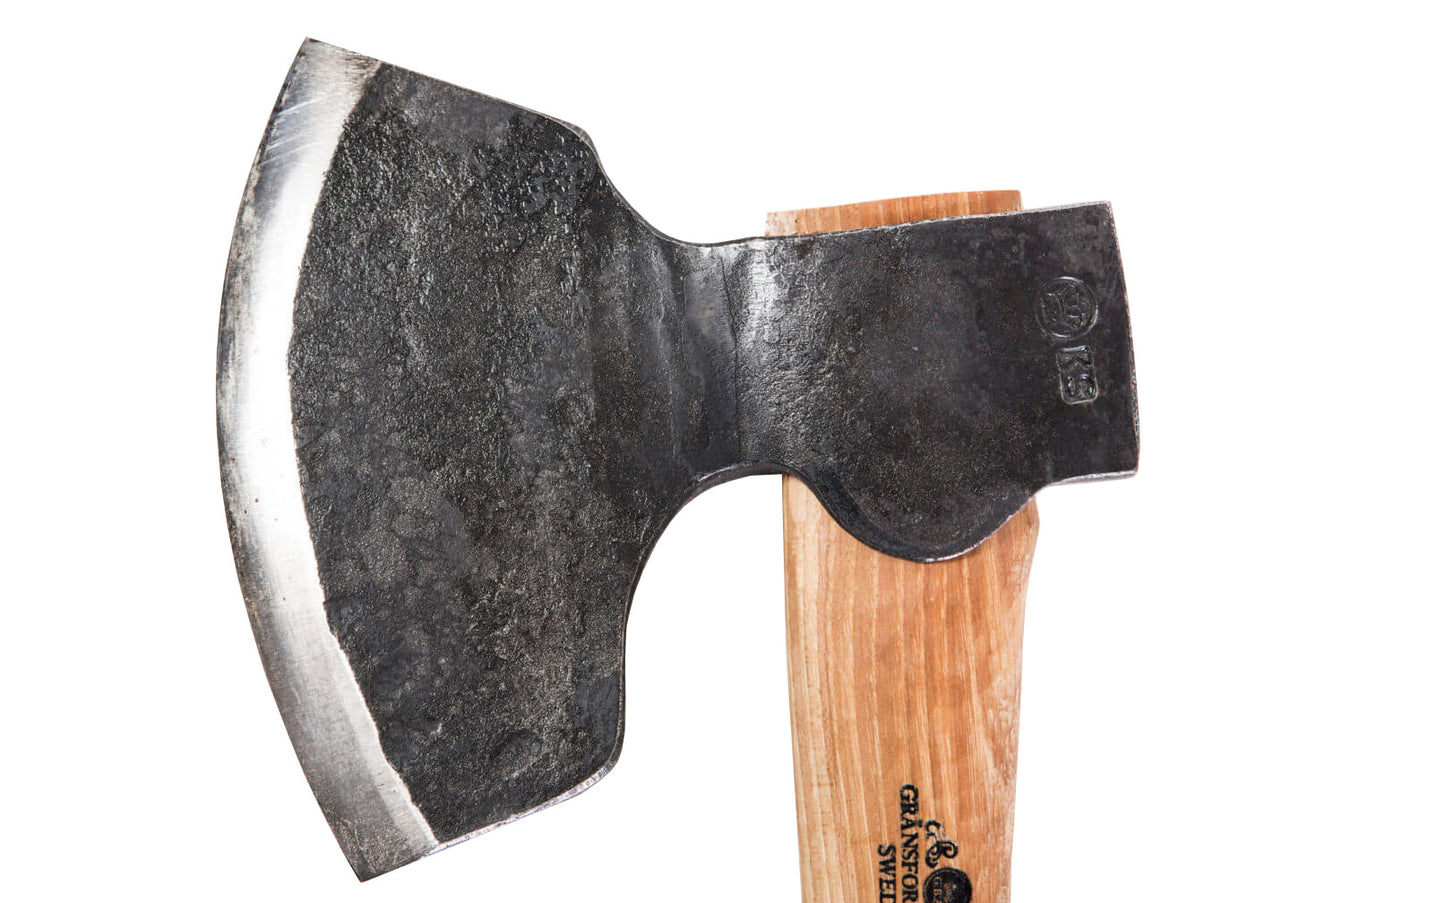 Made in Gränsfors, Sweden · Broad Axe 1900 series ~ Made of the highest quality Swedish steel ~ Hand-forged ~ Sharp edge - Left Bevel - Right Bevel - Straight Bevel - Suitable for squaring logs & planks. Log building axe - Right Angled Blade Broad Axe, Model 4821, Model 4822, Model 4823.